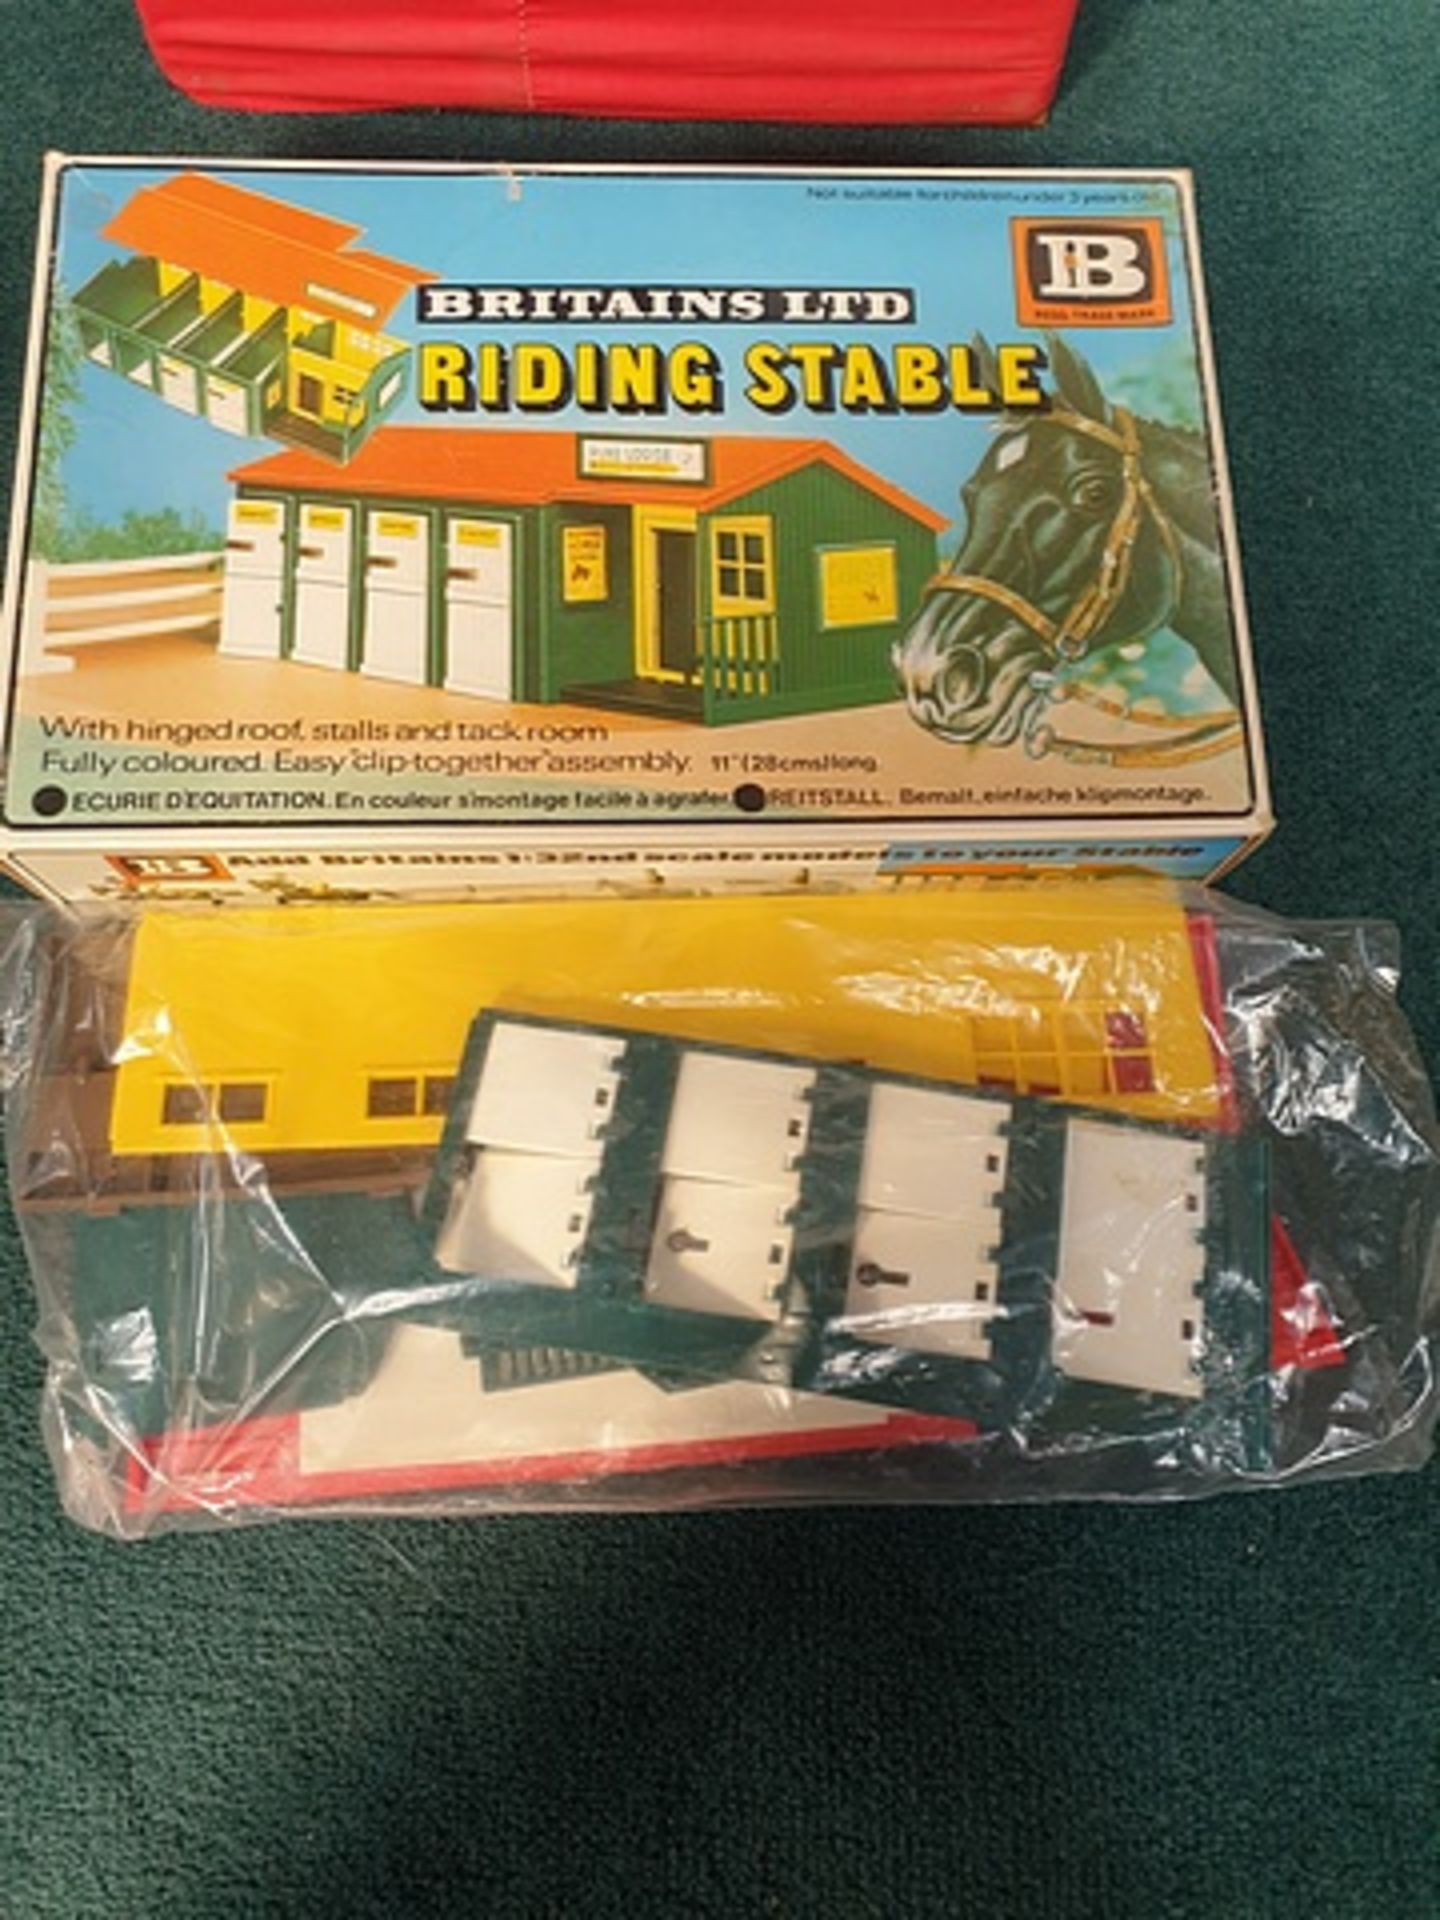 Britains Ltd Riding Stable SET Horses Are 1 1/2 And 2 Inches High The Set Includes 9 Horses 6 Riders - Image 2 of 3